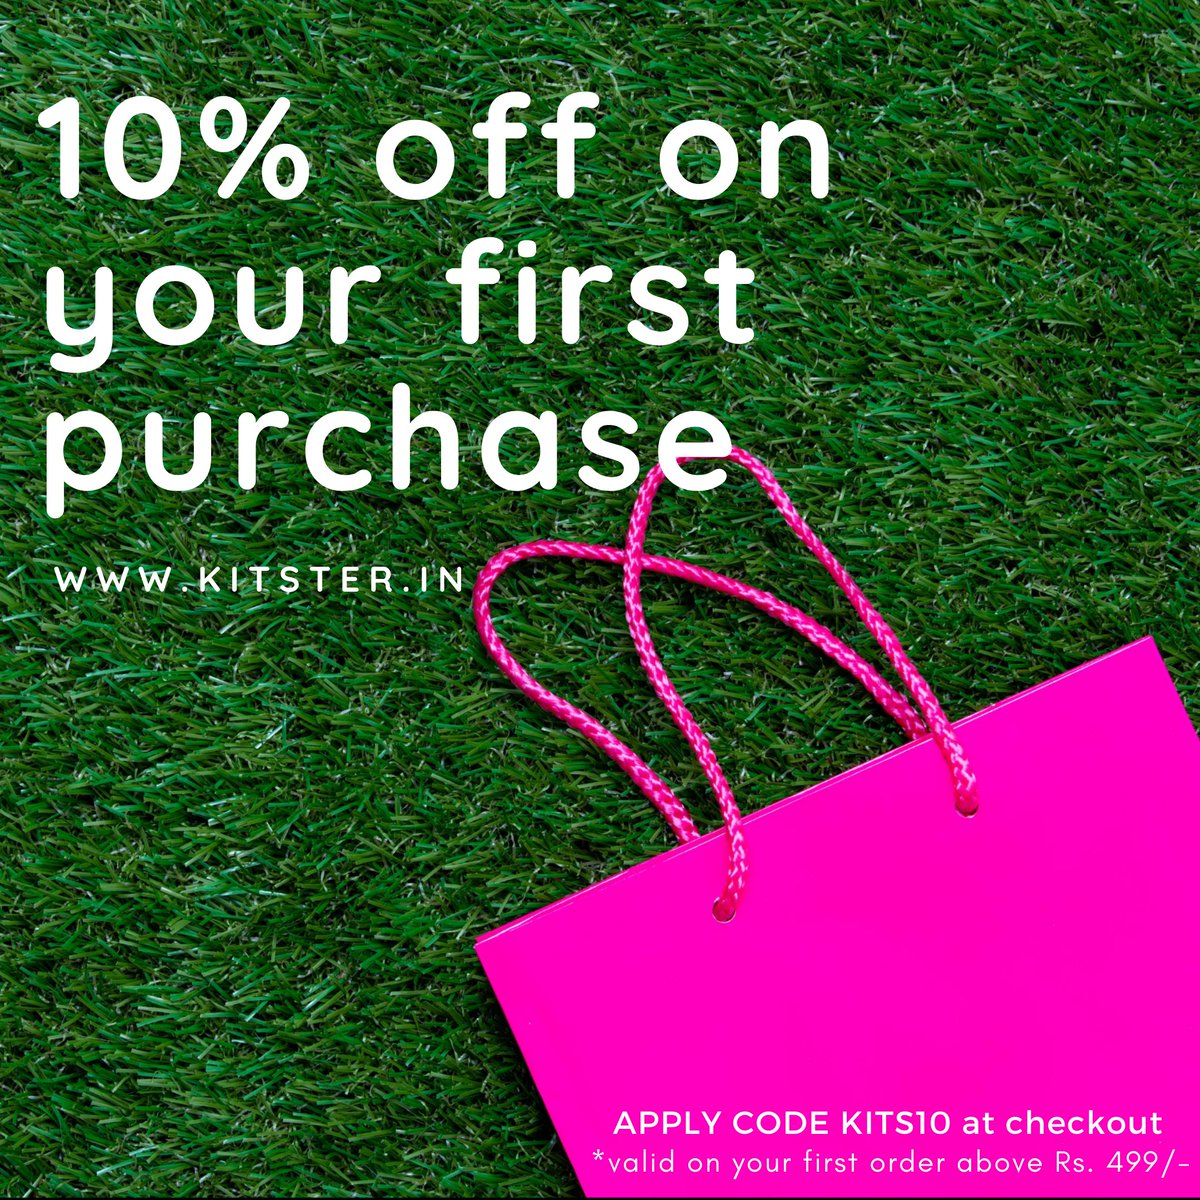 10% on your first purchase over Rs.499/- on kitster.in

#discount #10percentoff #deal #sale #shopping #onlineshopping #giftboxindia #giftboxes #Sustainablegifts #giftingideas #gifts #indiagiftbox #seedpen #spa #consciousgifts #beeswaxwrap #bamboostraw #ecofriendly